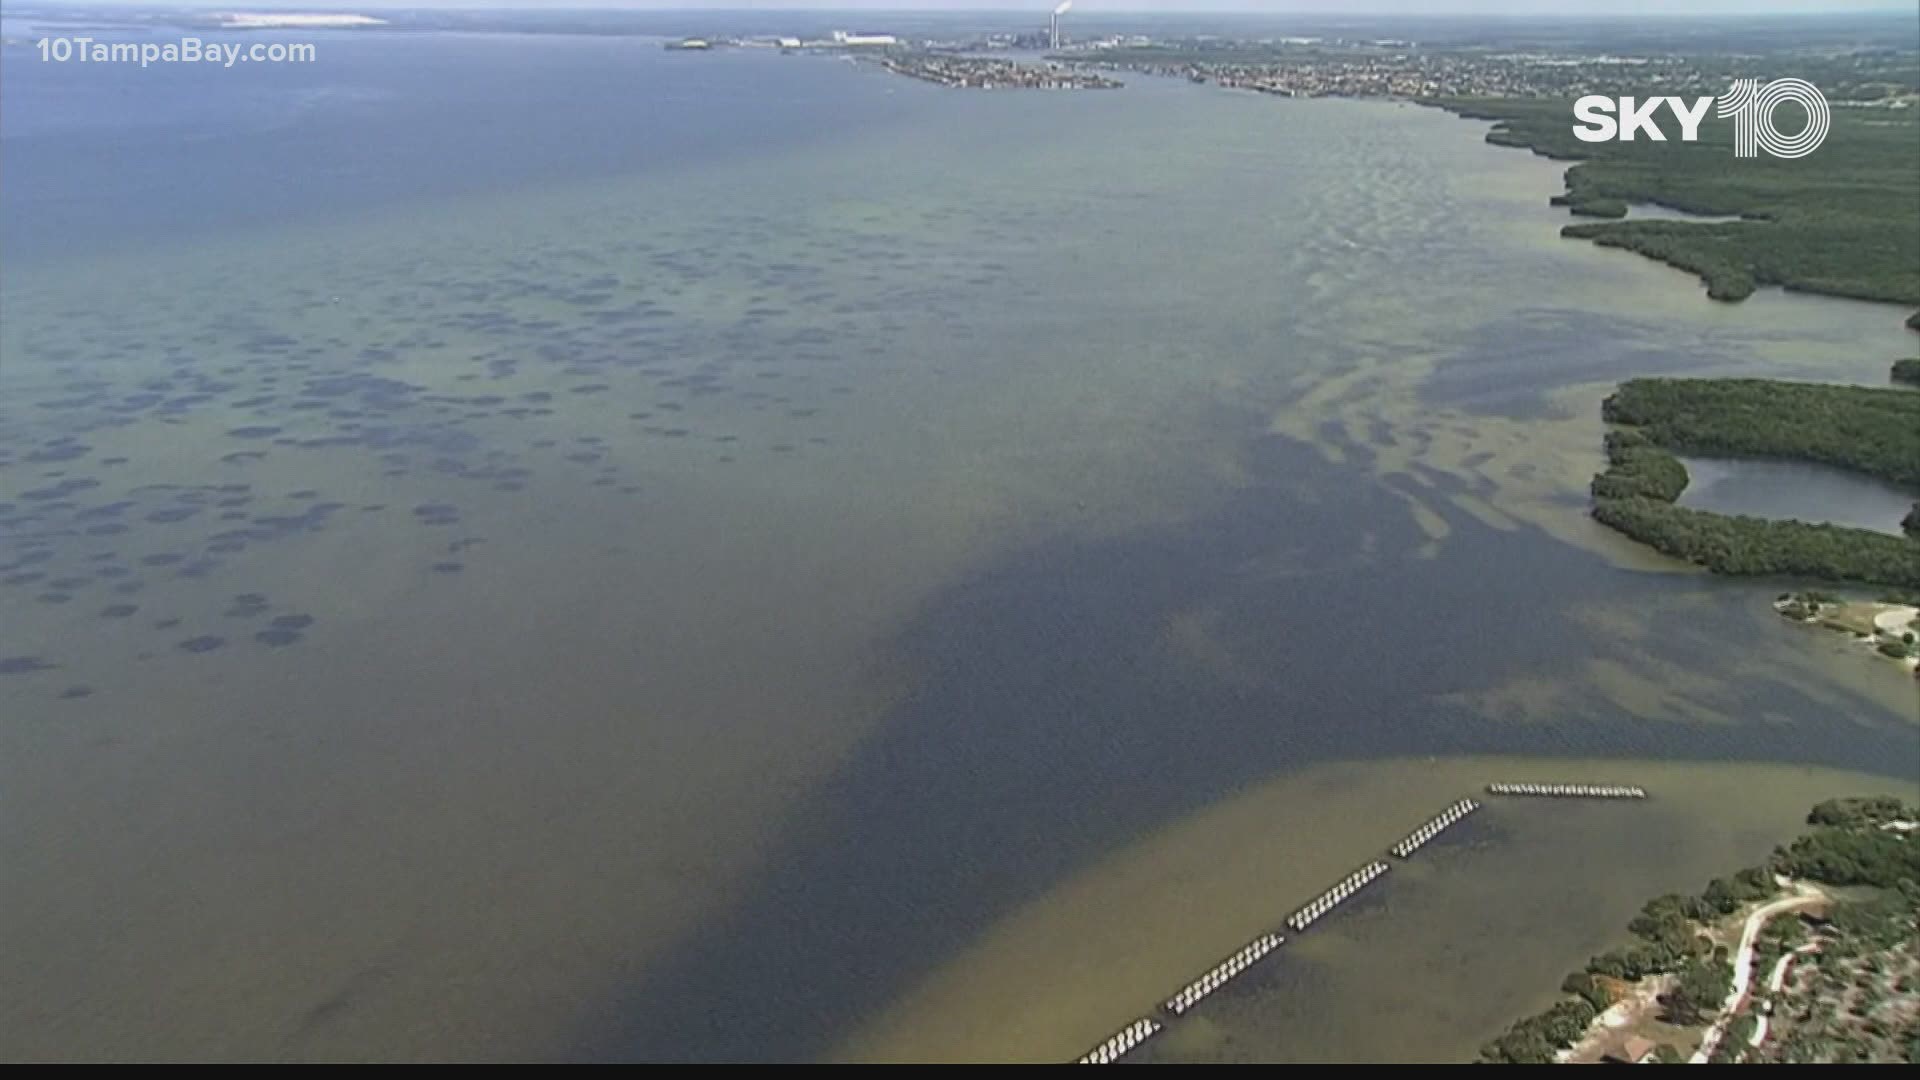 The models will help predict how the nutrient-rich wastewater dumped into Port Manatee will disperse throughout the bay.